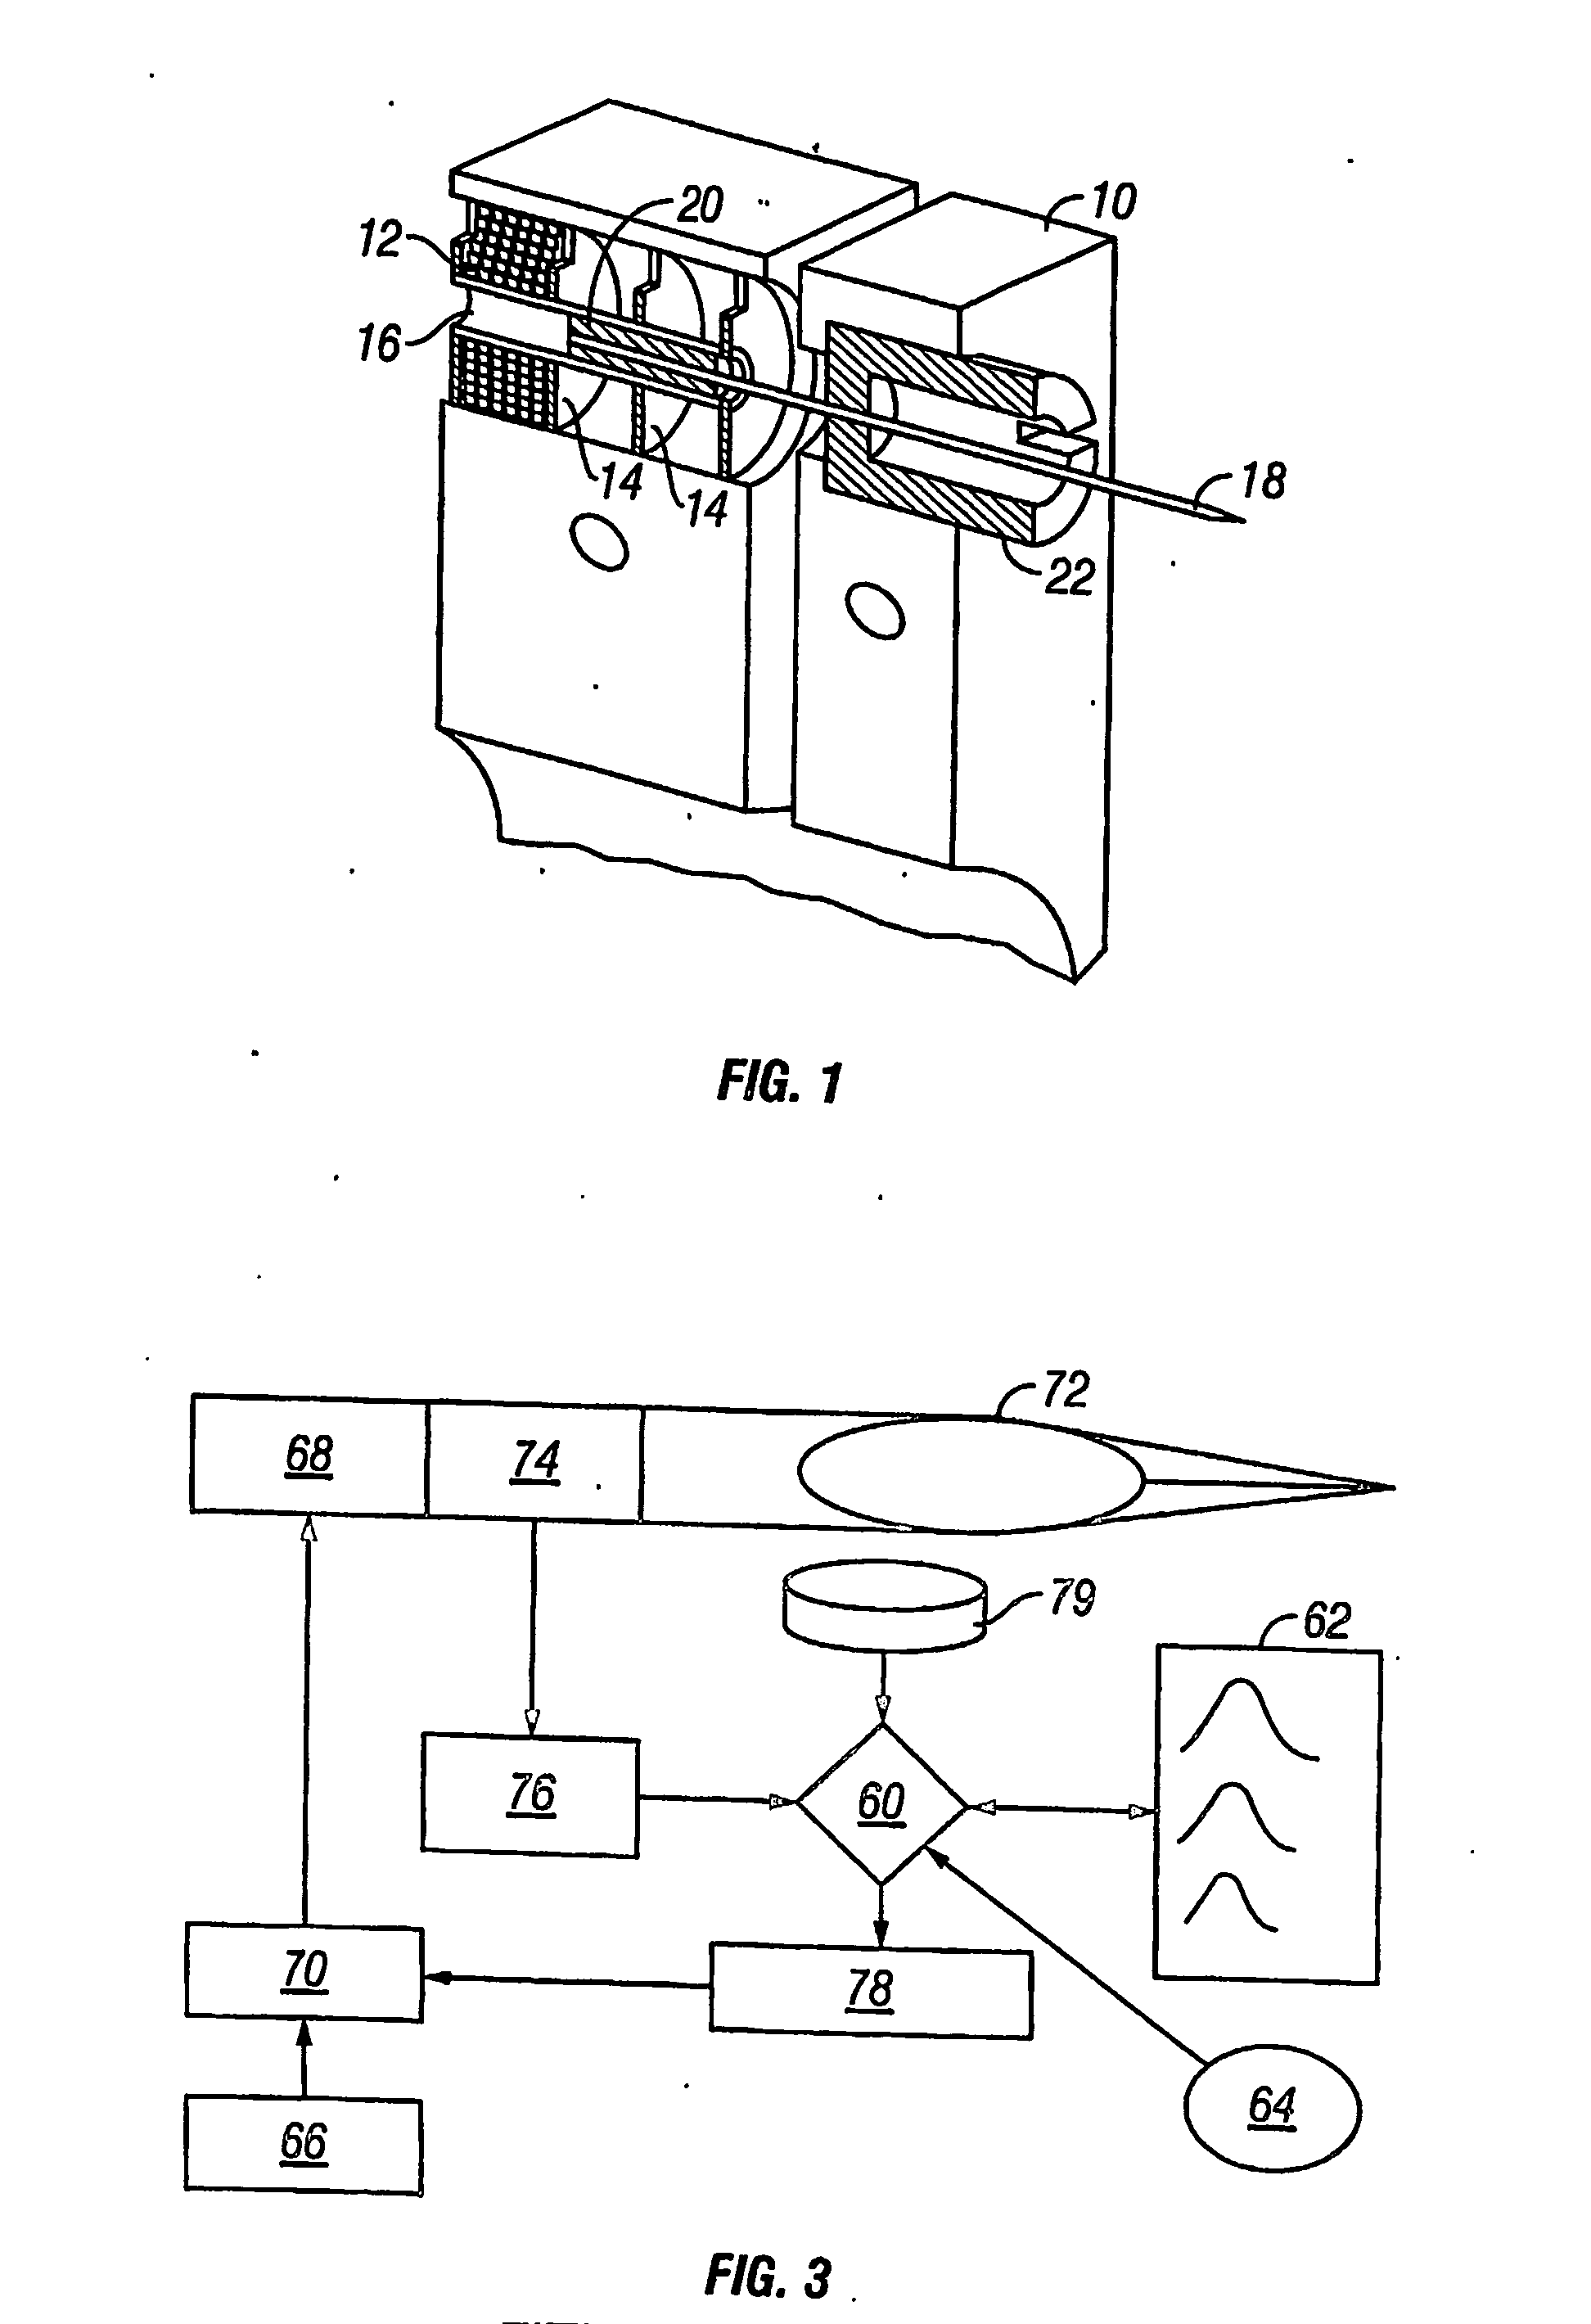 Method and apparatus for body fluid sampling and analyte sensing